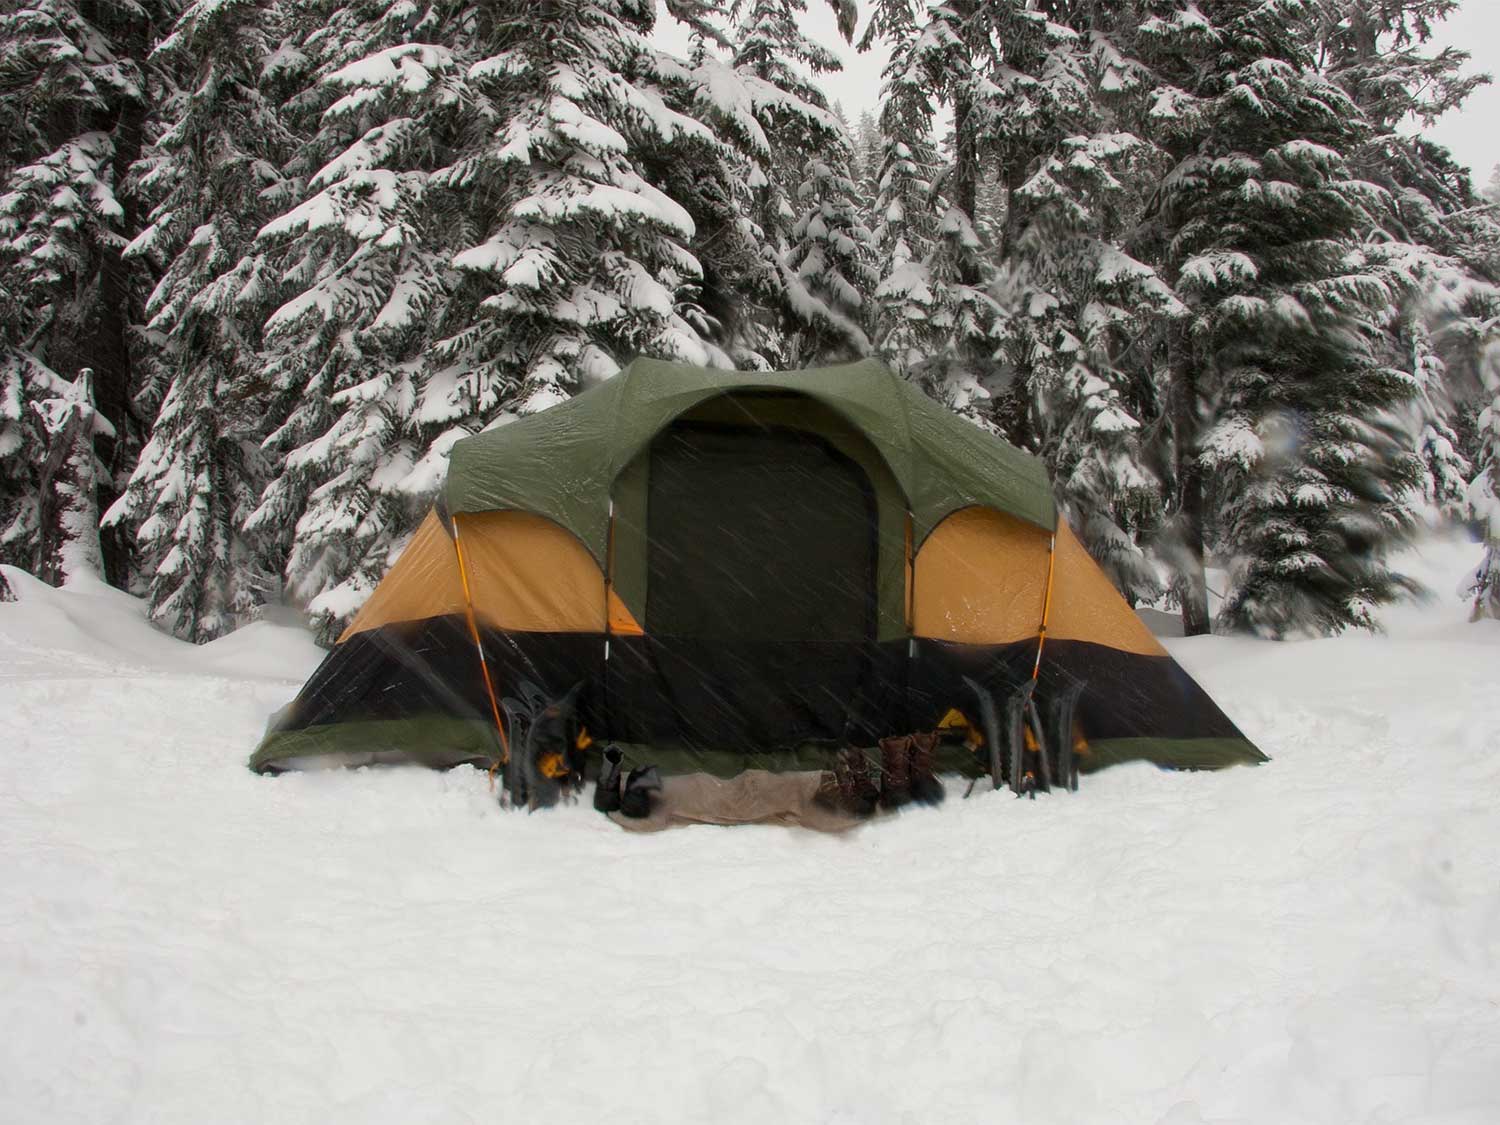 12 Best Winter Tents for Cold Weather Camping (2022 Buying Guide)